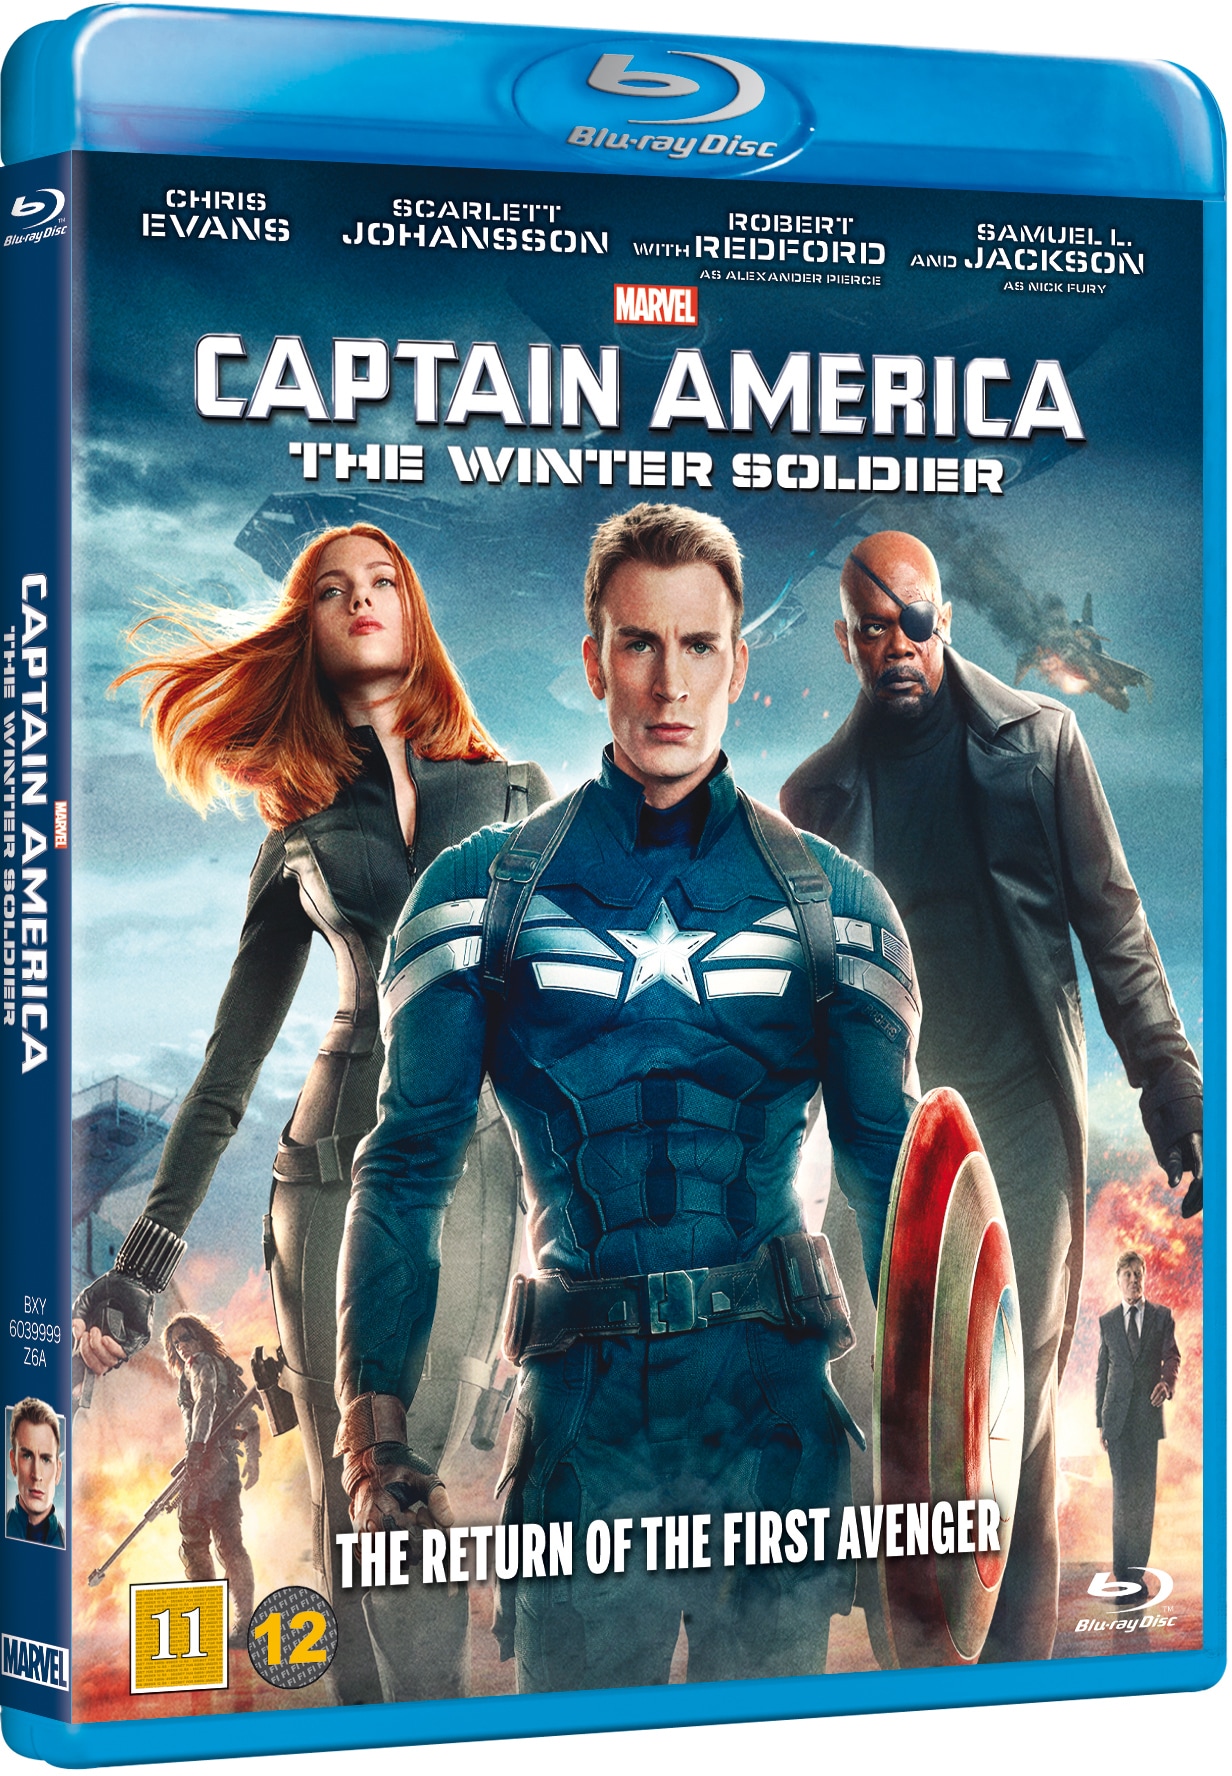 Captain america: the winter soldier (blu-ray)